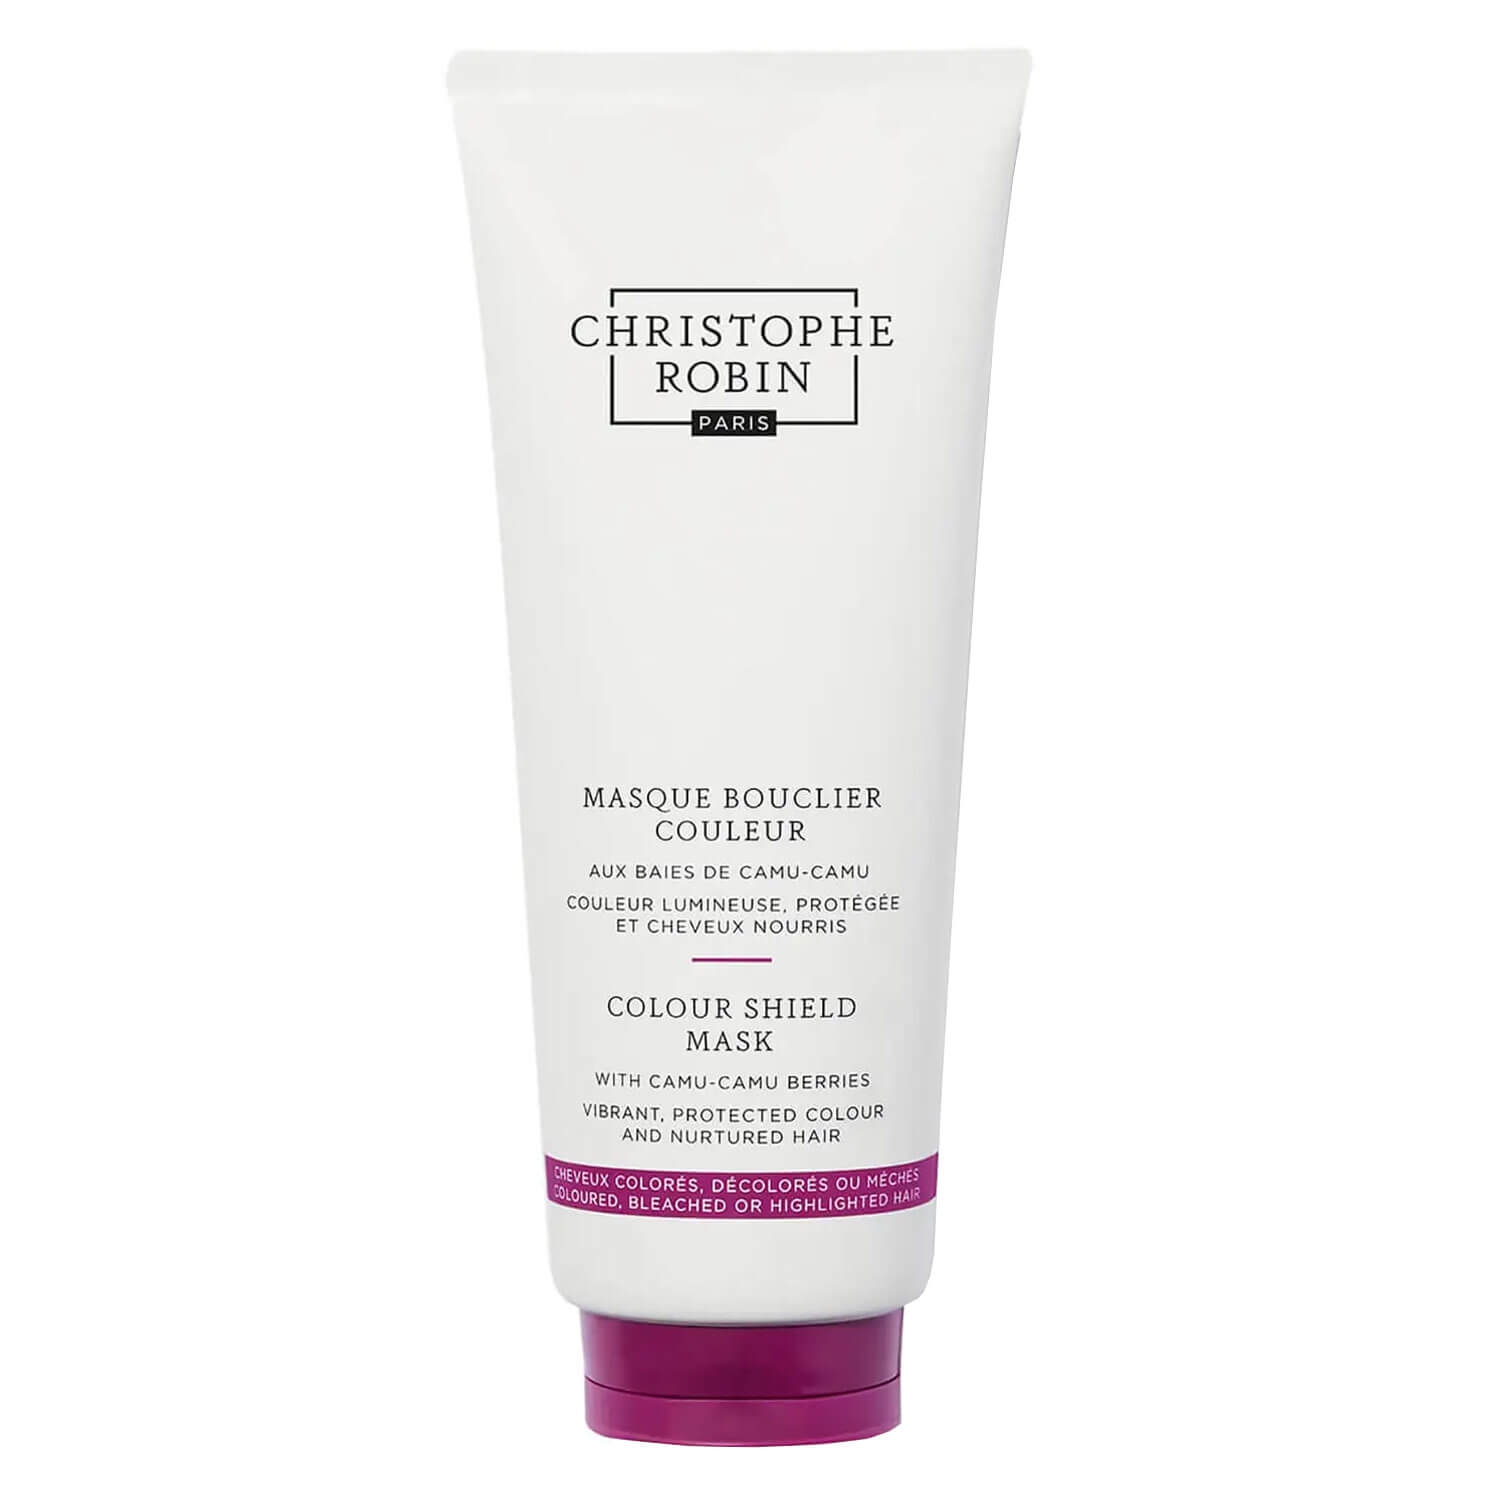 Product image from Christophe Robin - Masque Bouclier Couleur